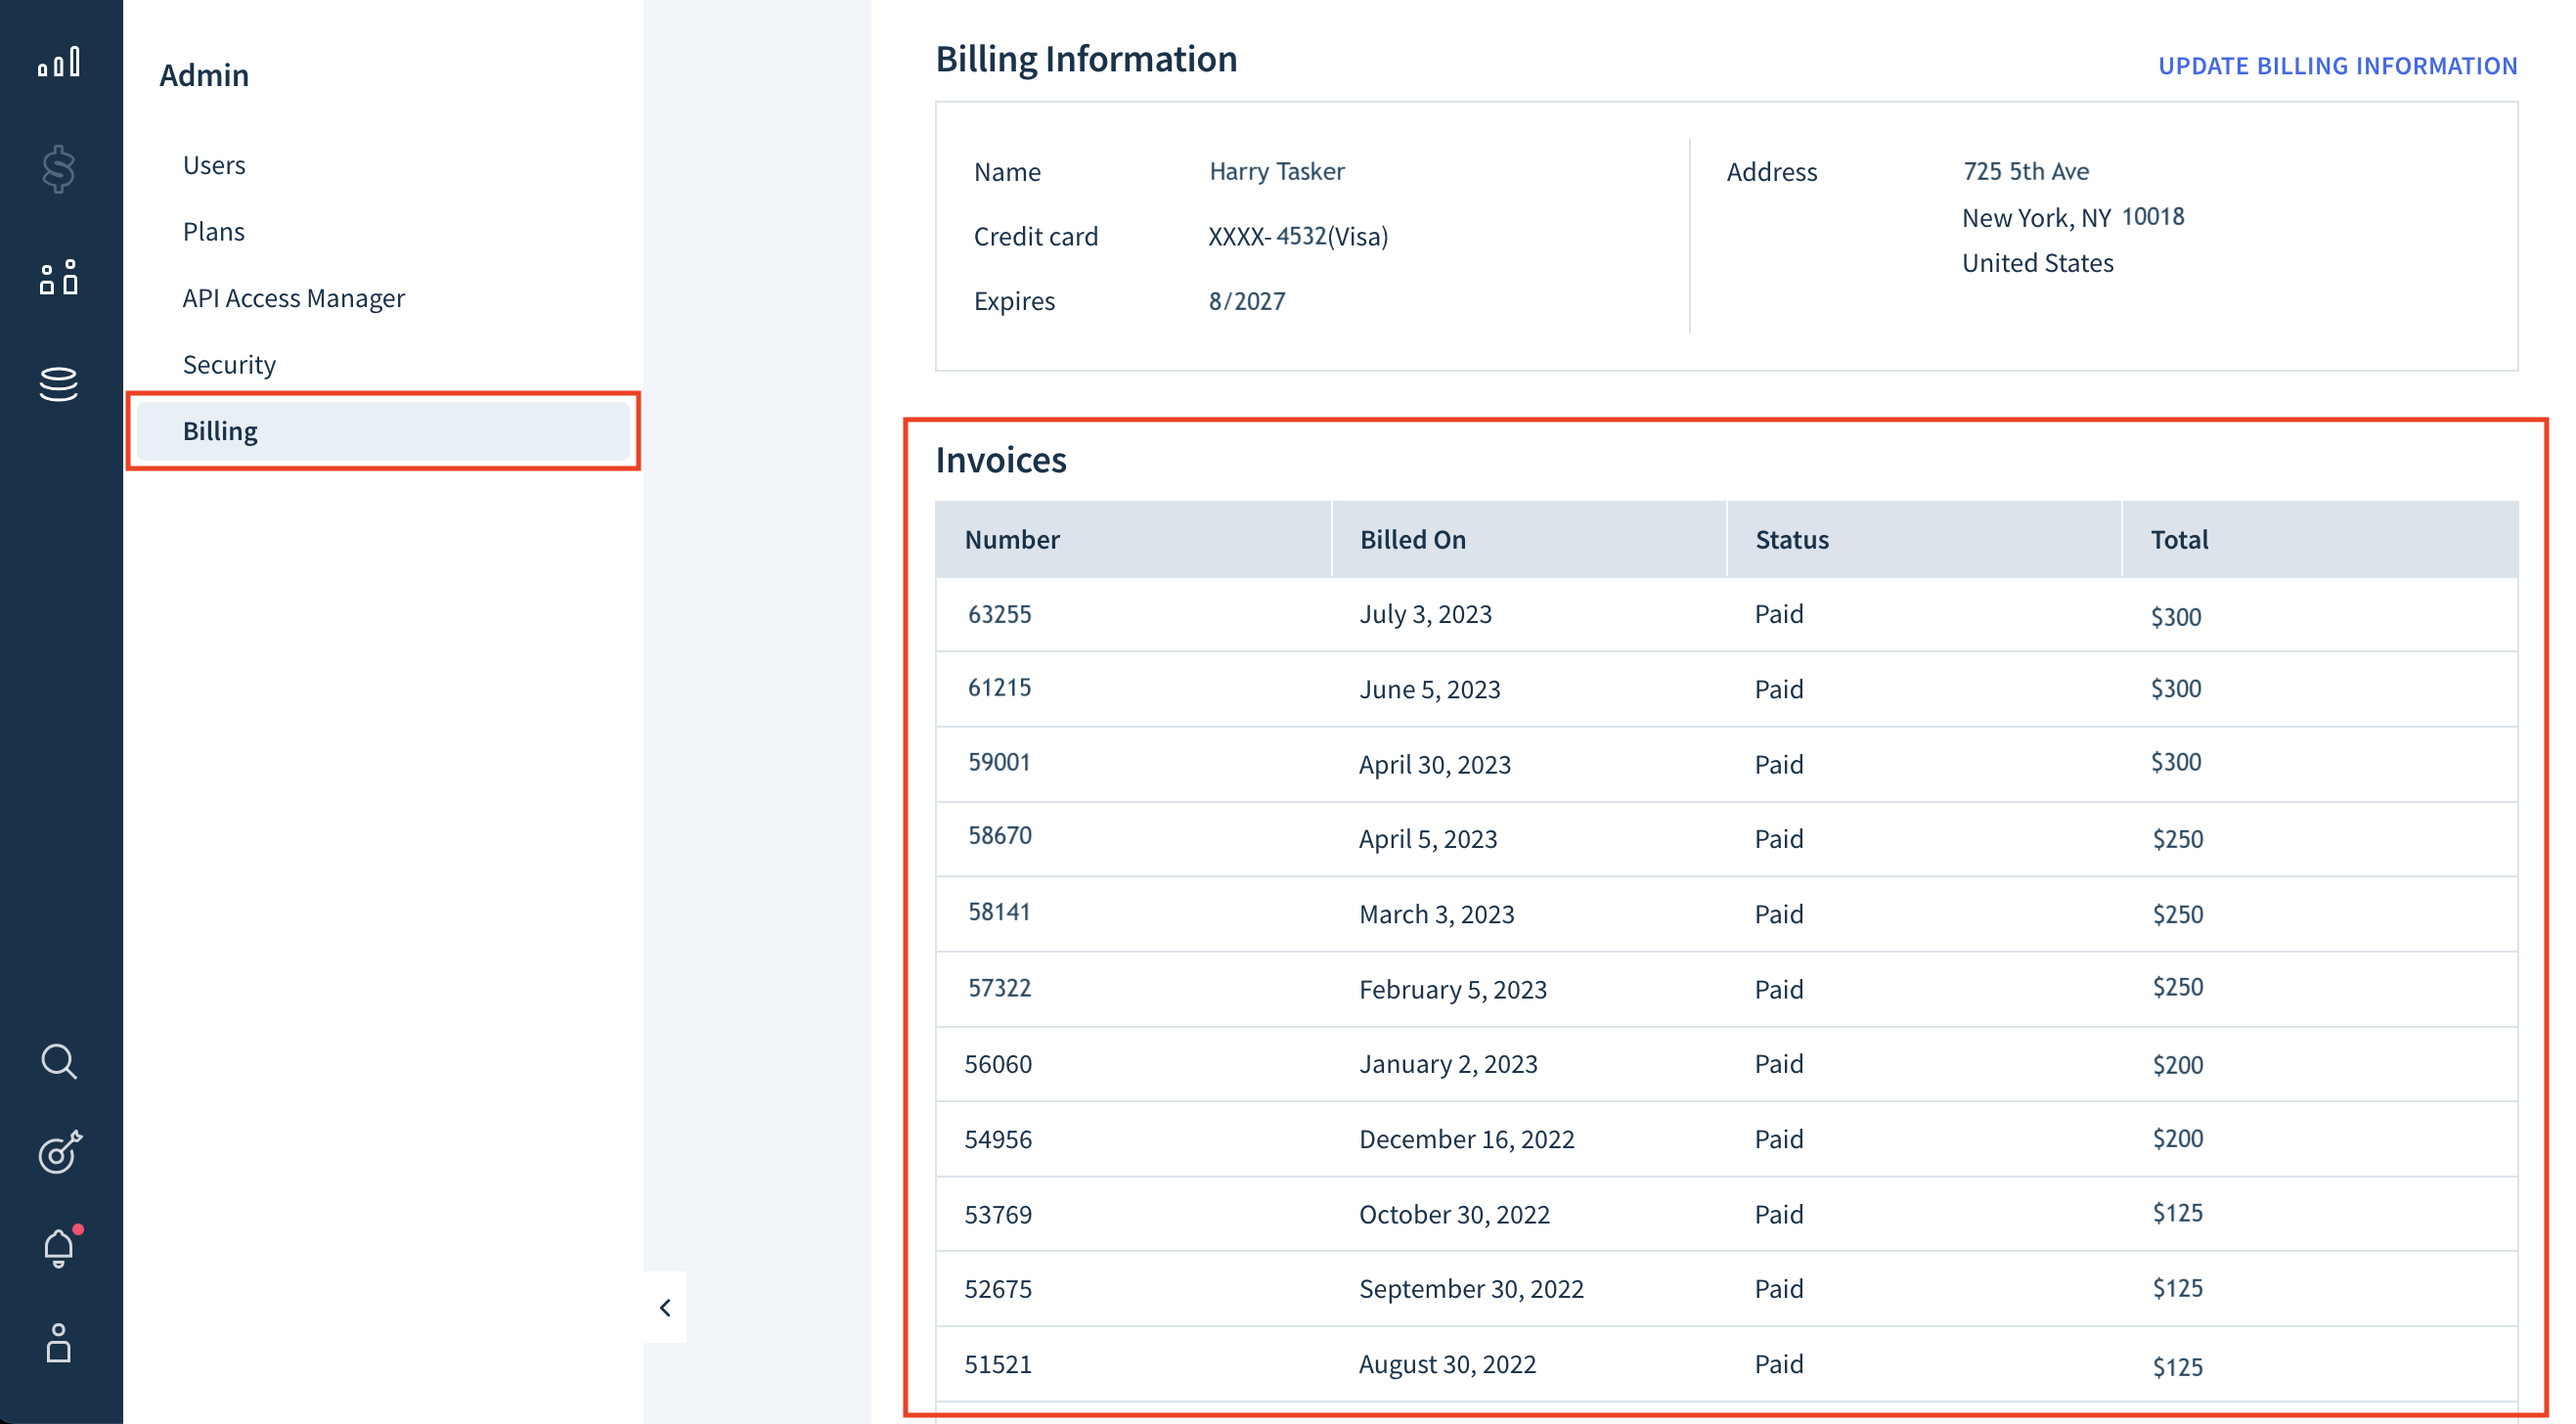 The Billing page showing two sections: Billing Information and Invoices. The Invoices section lists all customer’s invoices as a table with the following columns: Number, Billed On, Status, and Total.